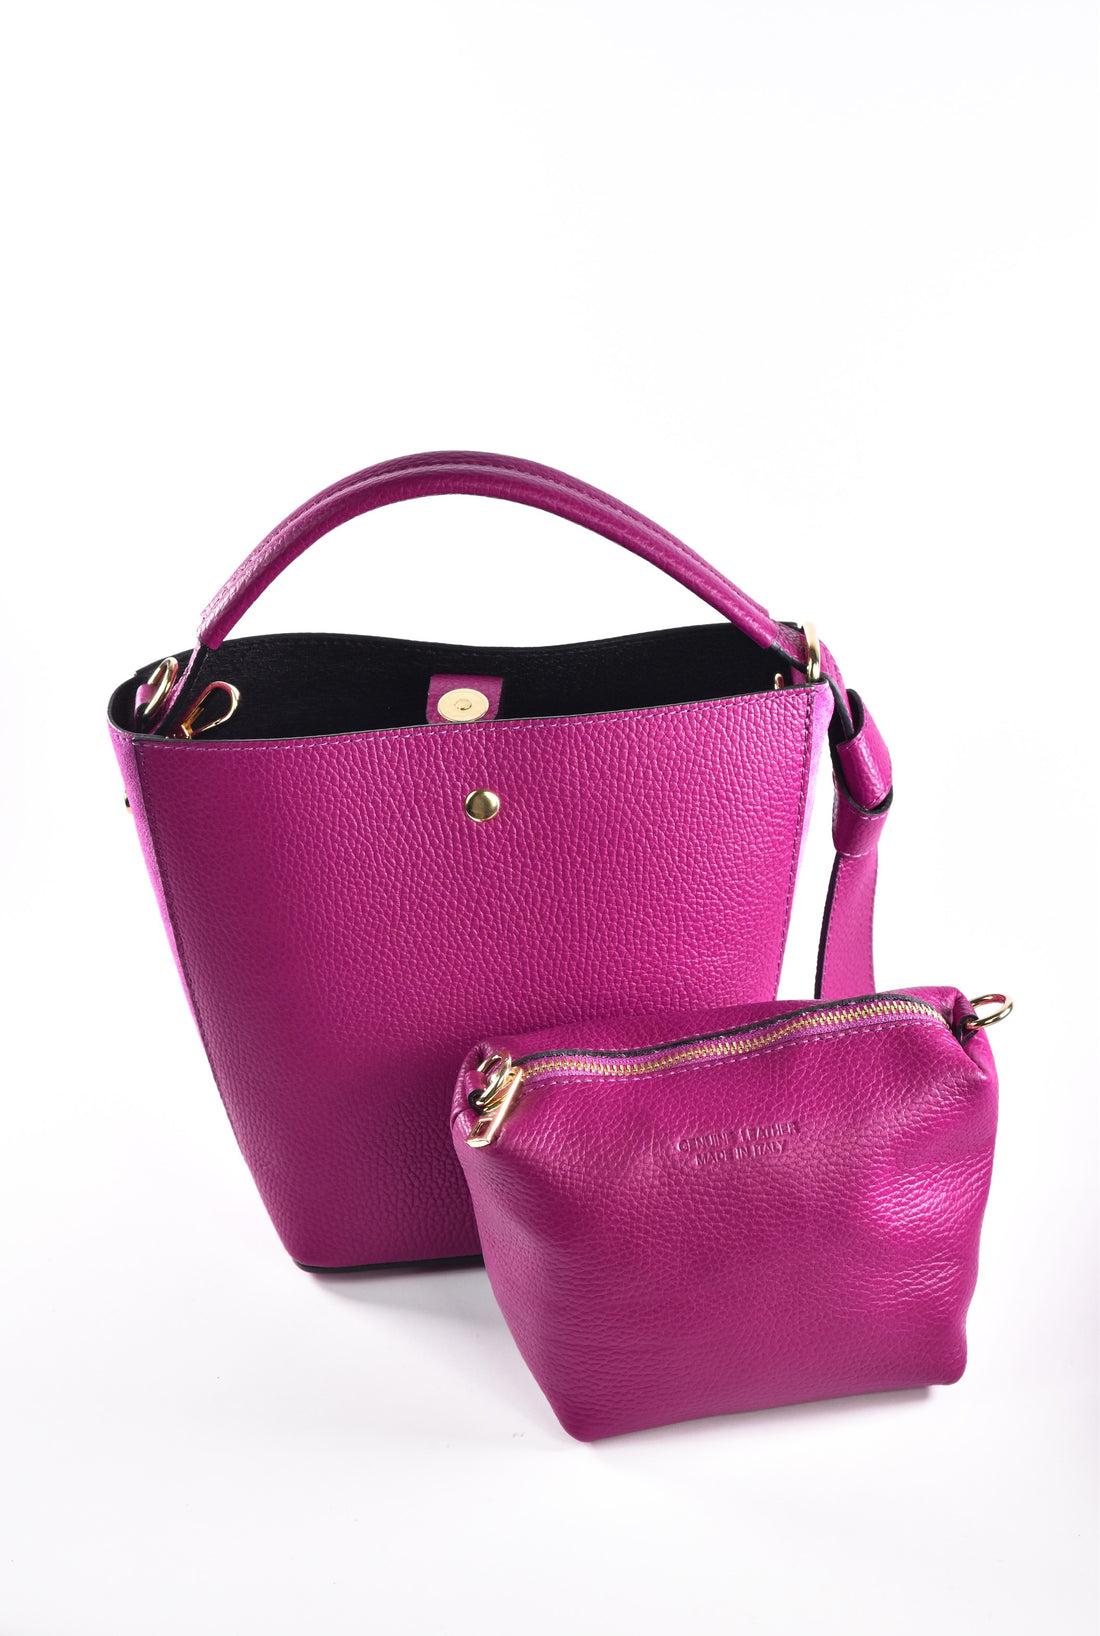 Nives bag in Bubble Pink Dollar leather